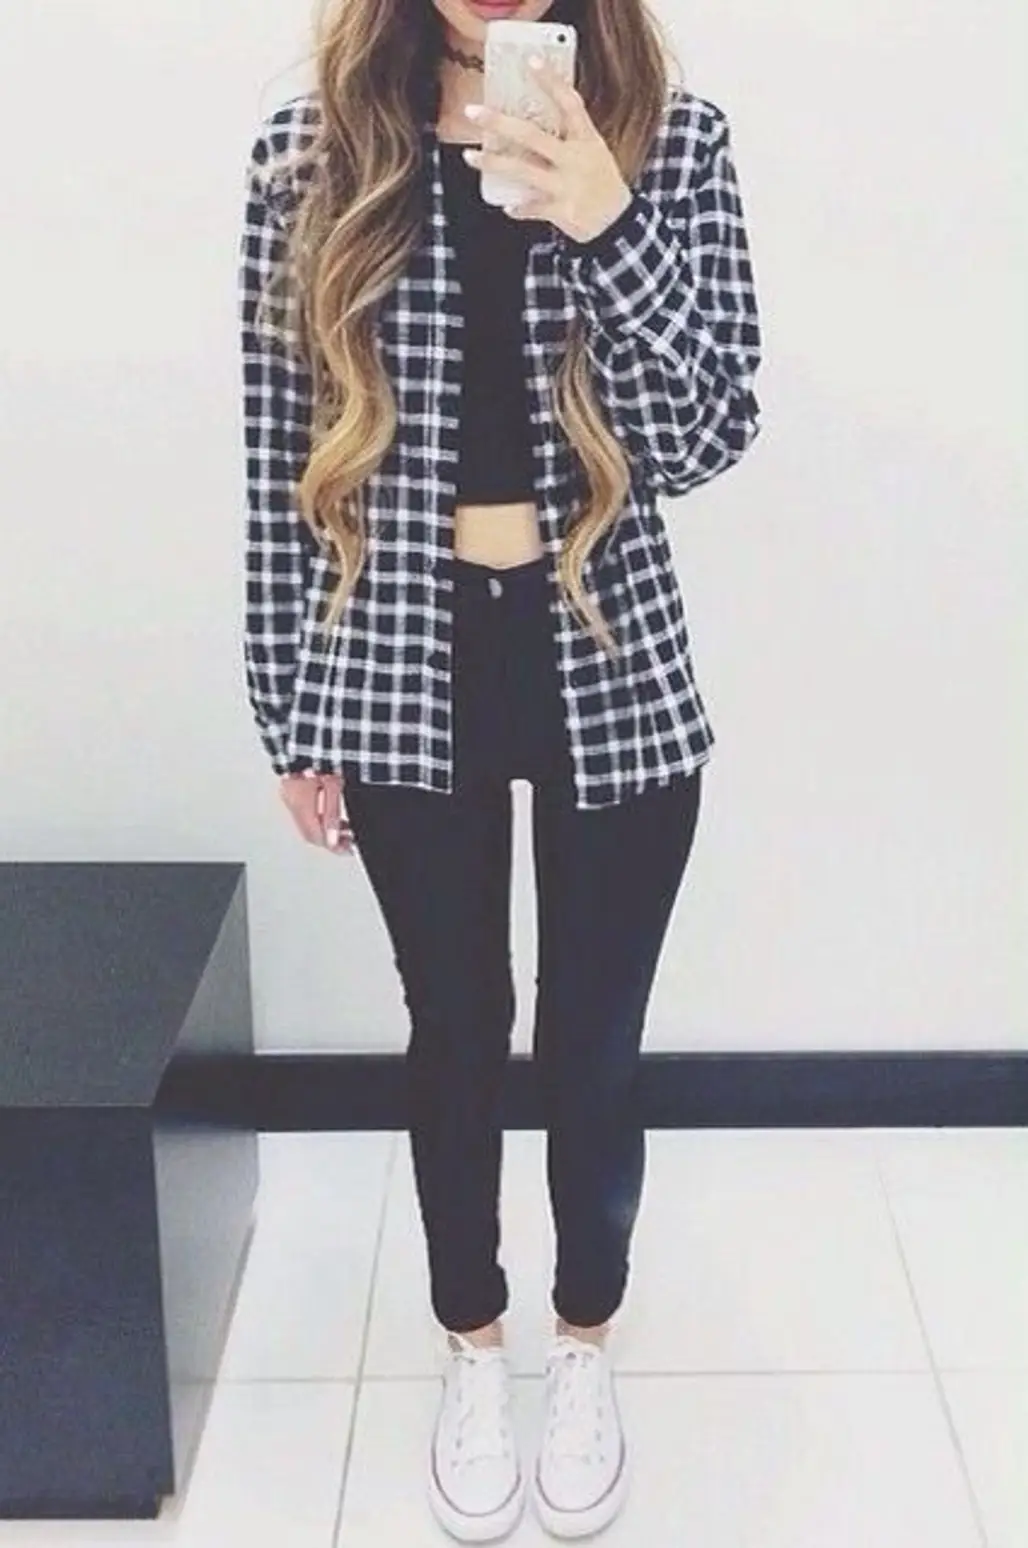 The Crop Top and Plaid Combo Will Never Go out of Style